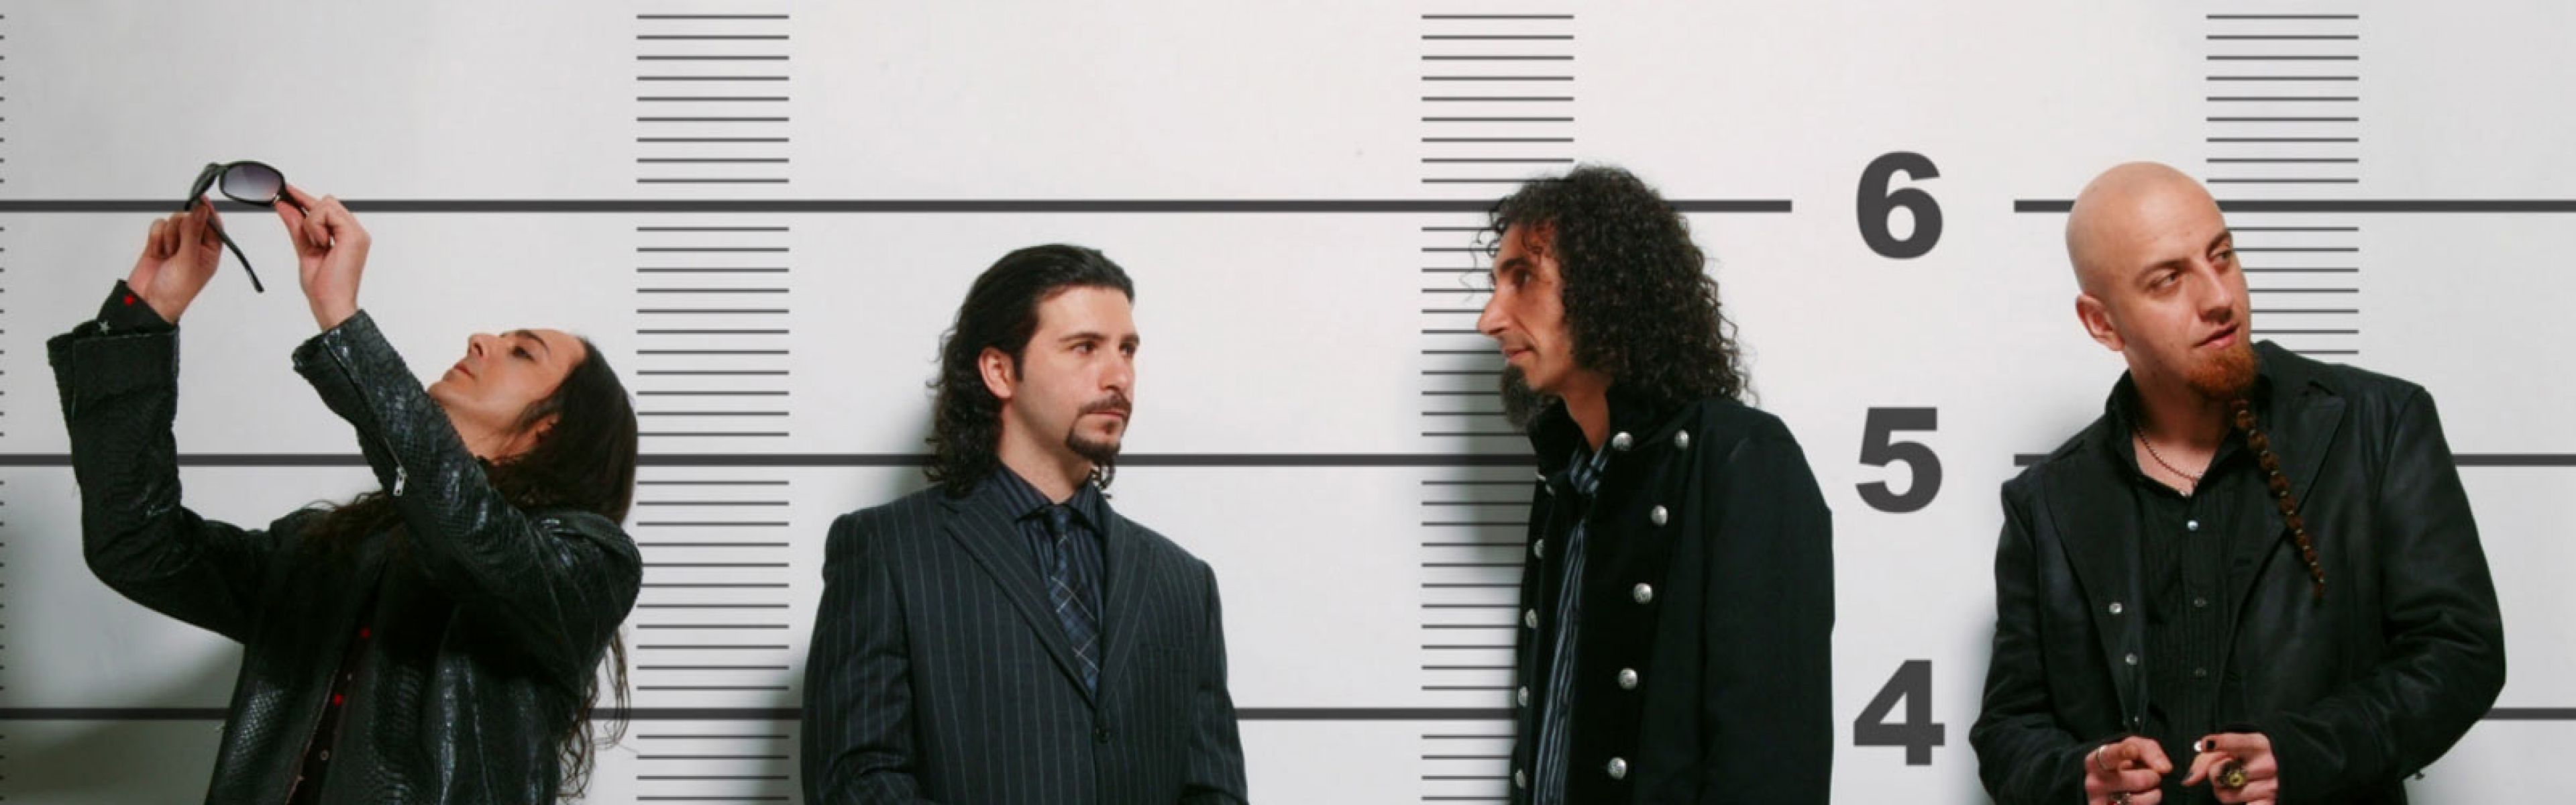 Download Wallpaper 3840x1200 System of a down, Band, Members